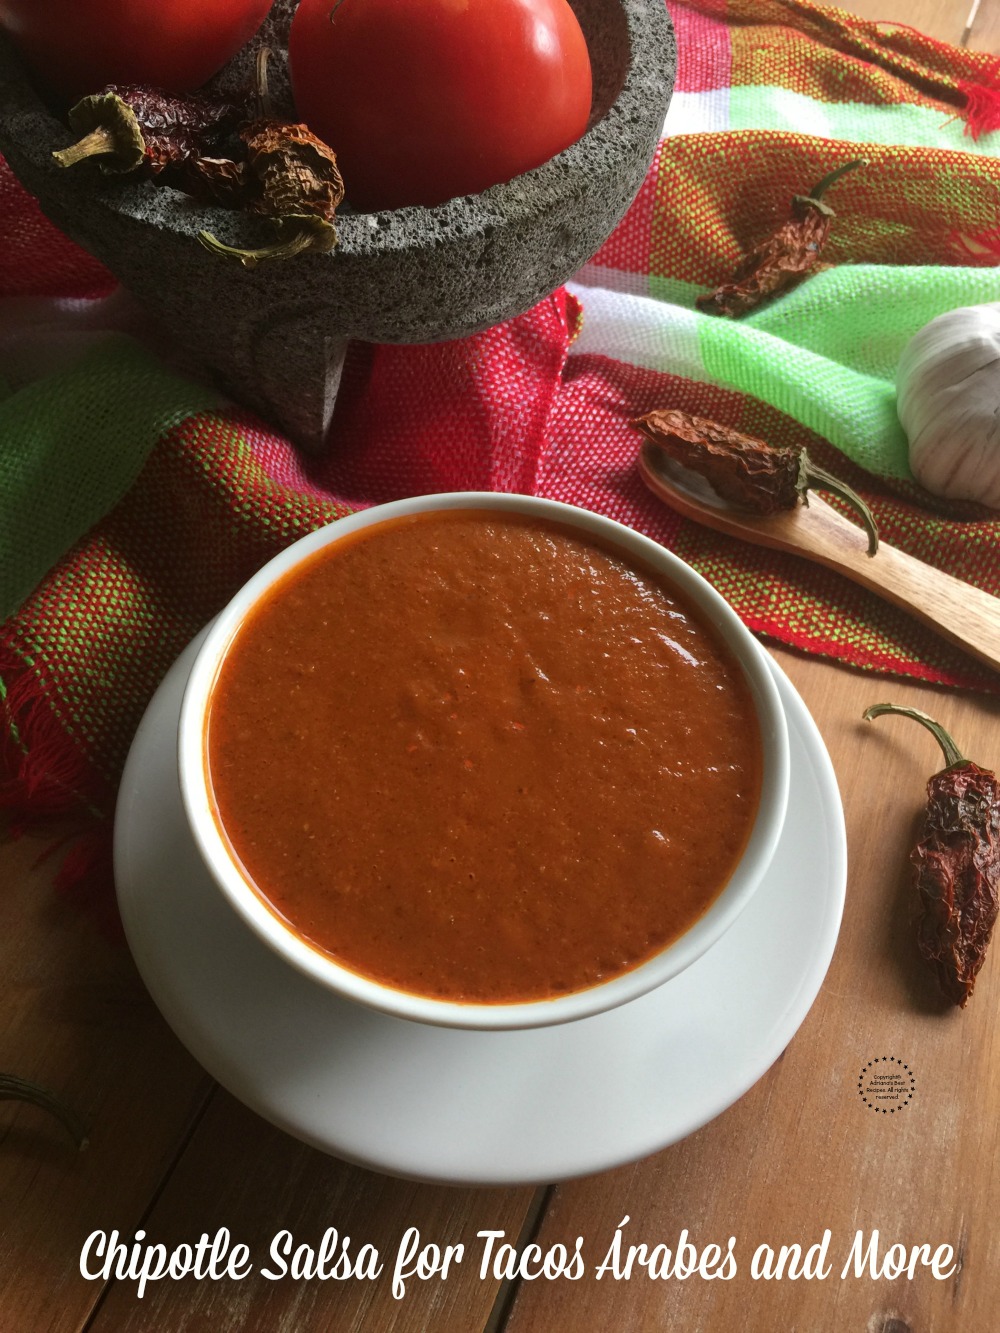 Mexican cuisine has a vast variety of salsas and one of them is the famous chipotle salsa. Mostly used for Tacos Arabes but also used for other dishes